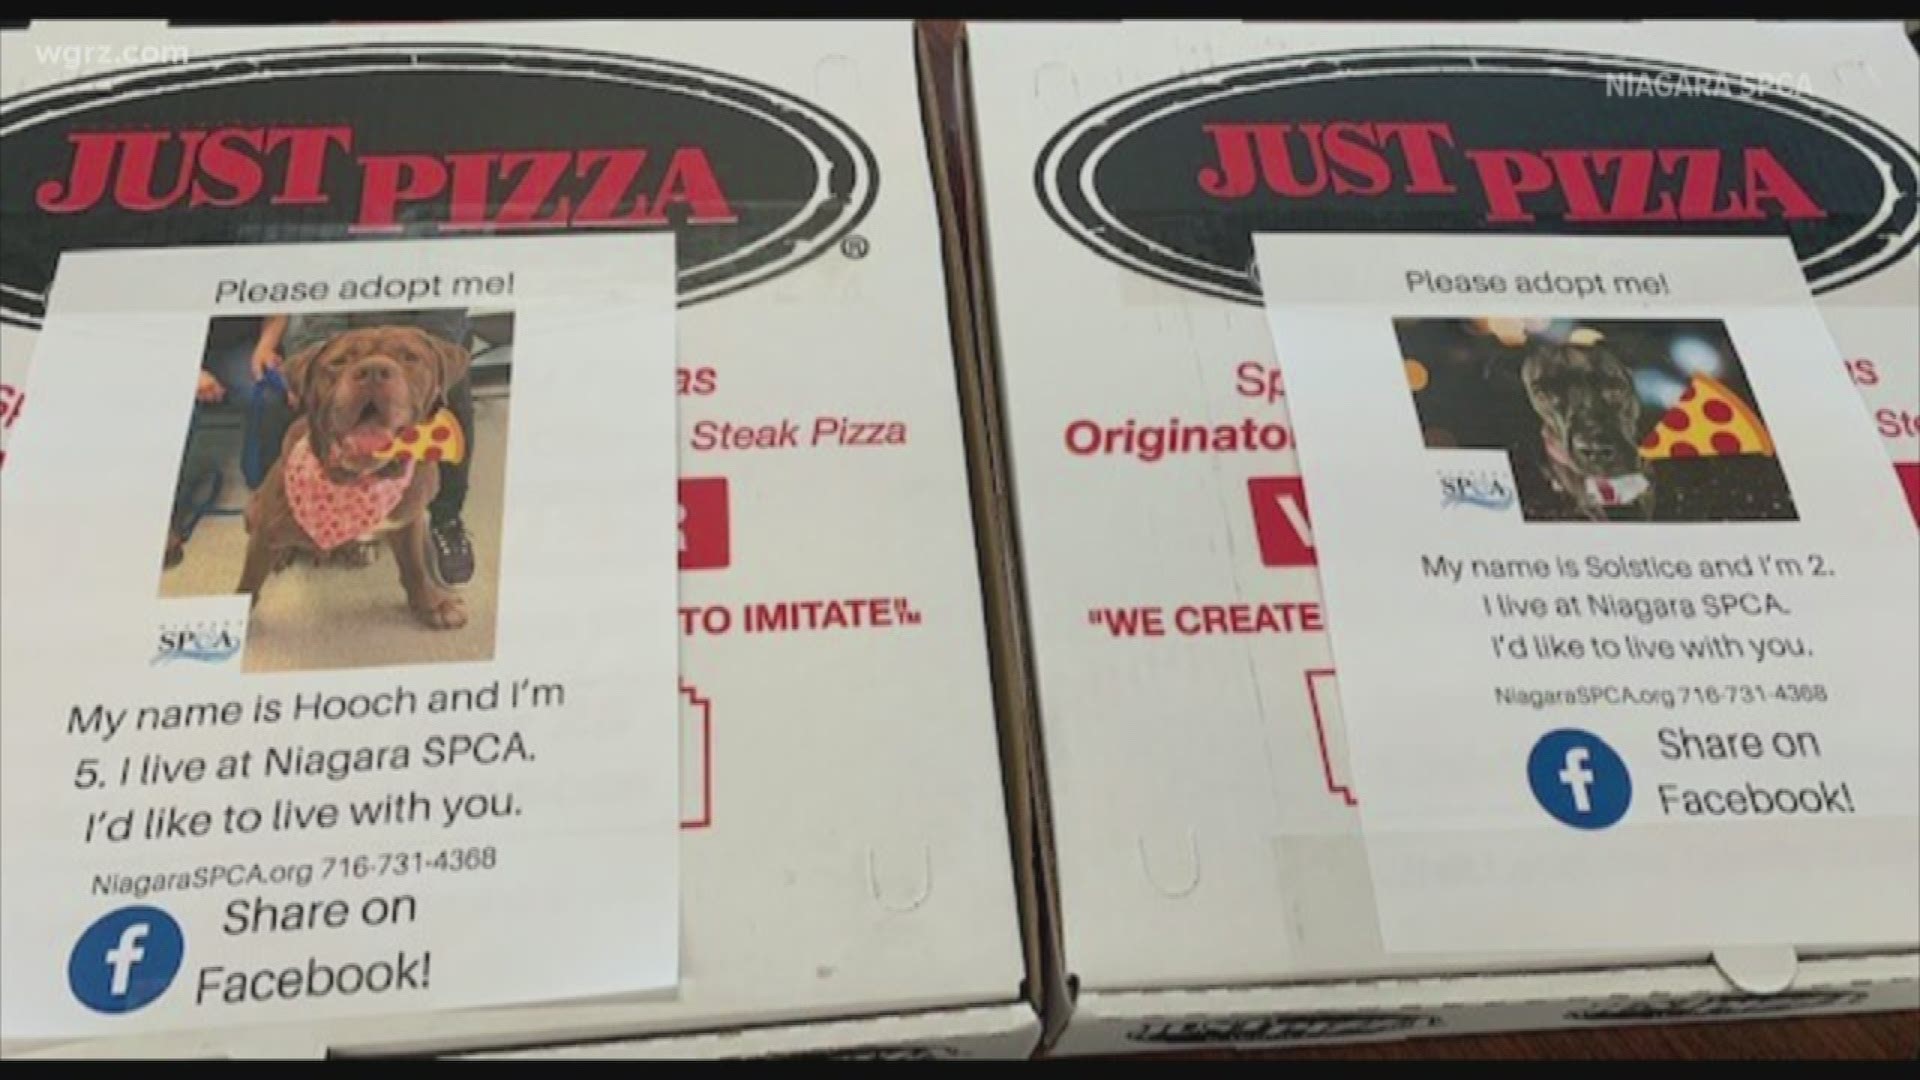 Customers who order from Just Pizza on Saturday and Sunday will find their box tops with a flier featuring an adoptable dog.